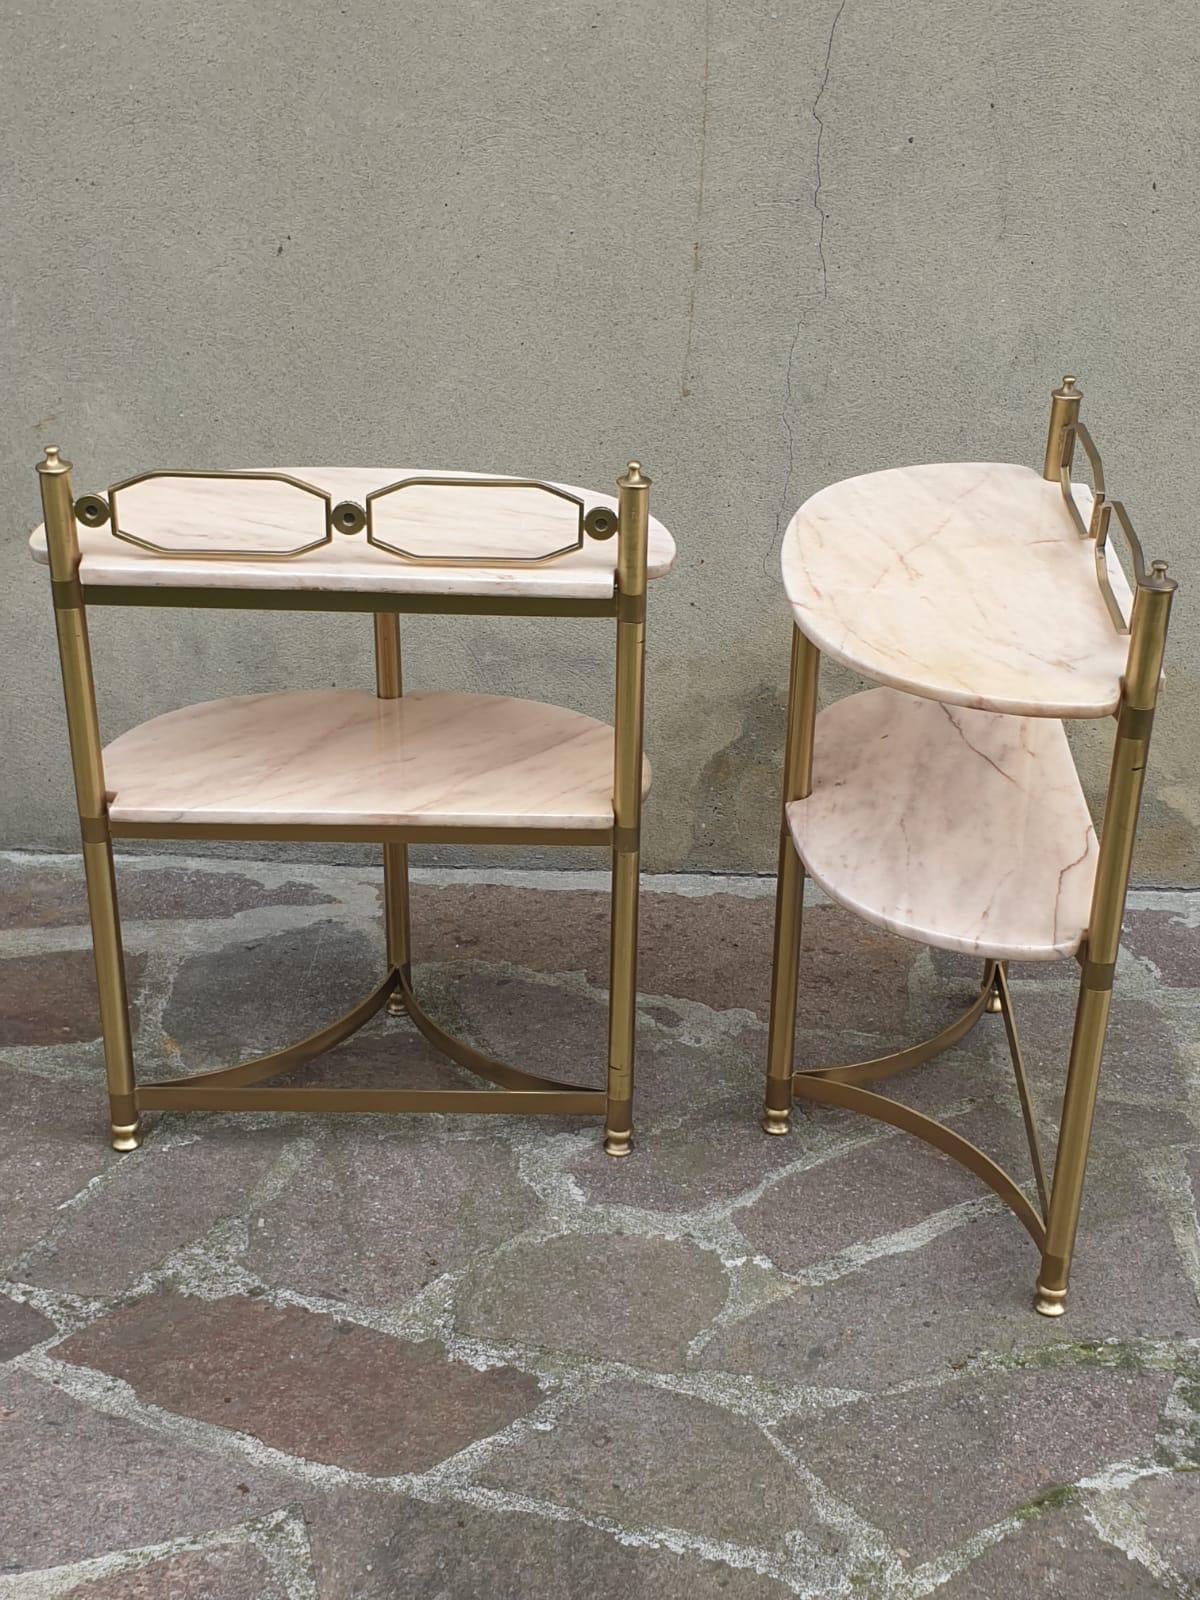 Pair of demi-lune side tables or night stands.
Made in brass and Portuguese pink marble. Side tables are from the 1950 s period 
It might show slight traces of use since it's vintage, but it can be considered as in excellent original condition and